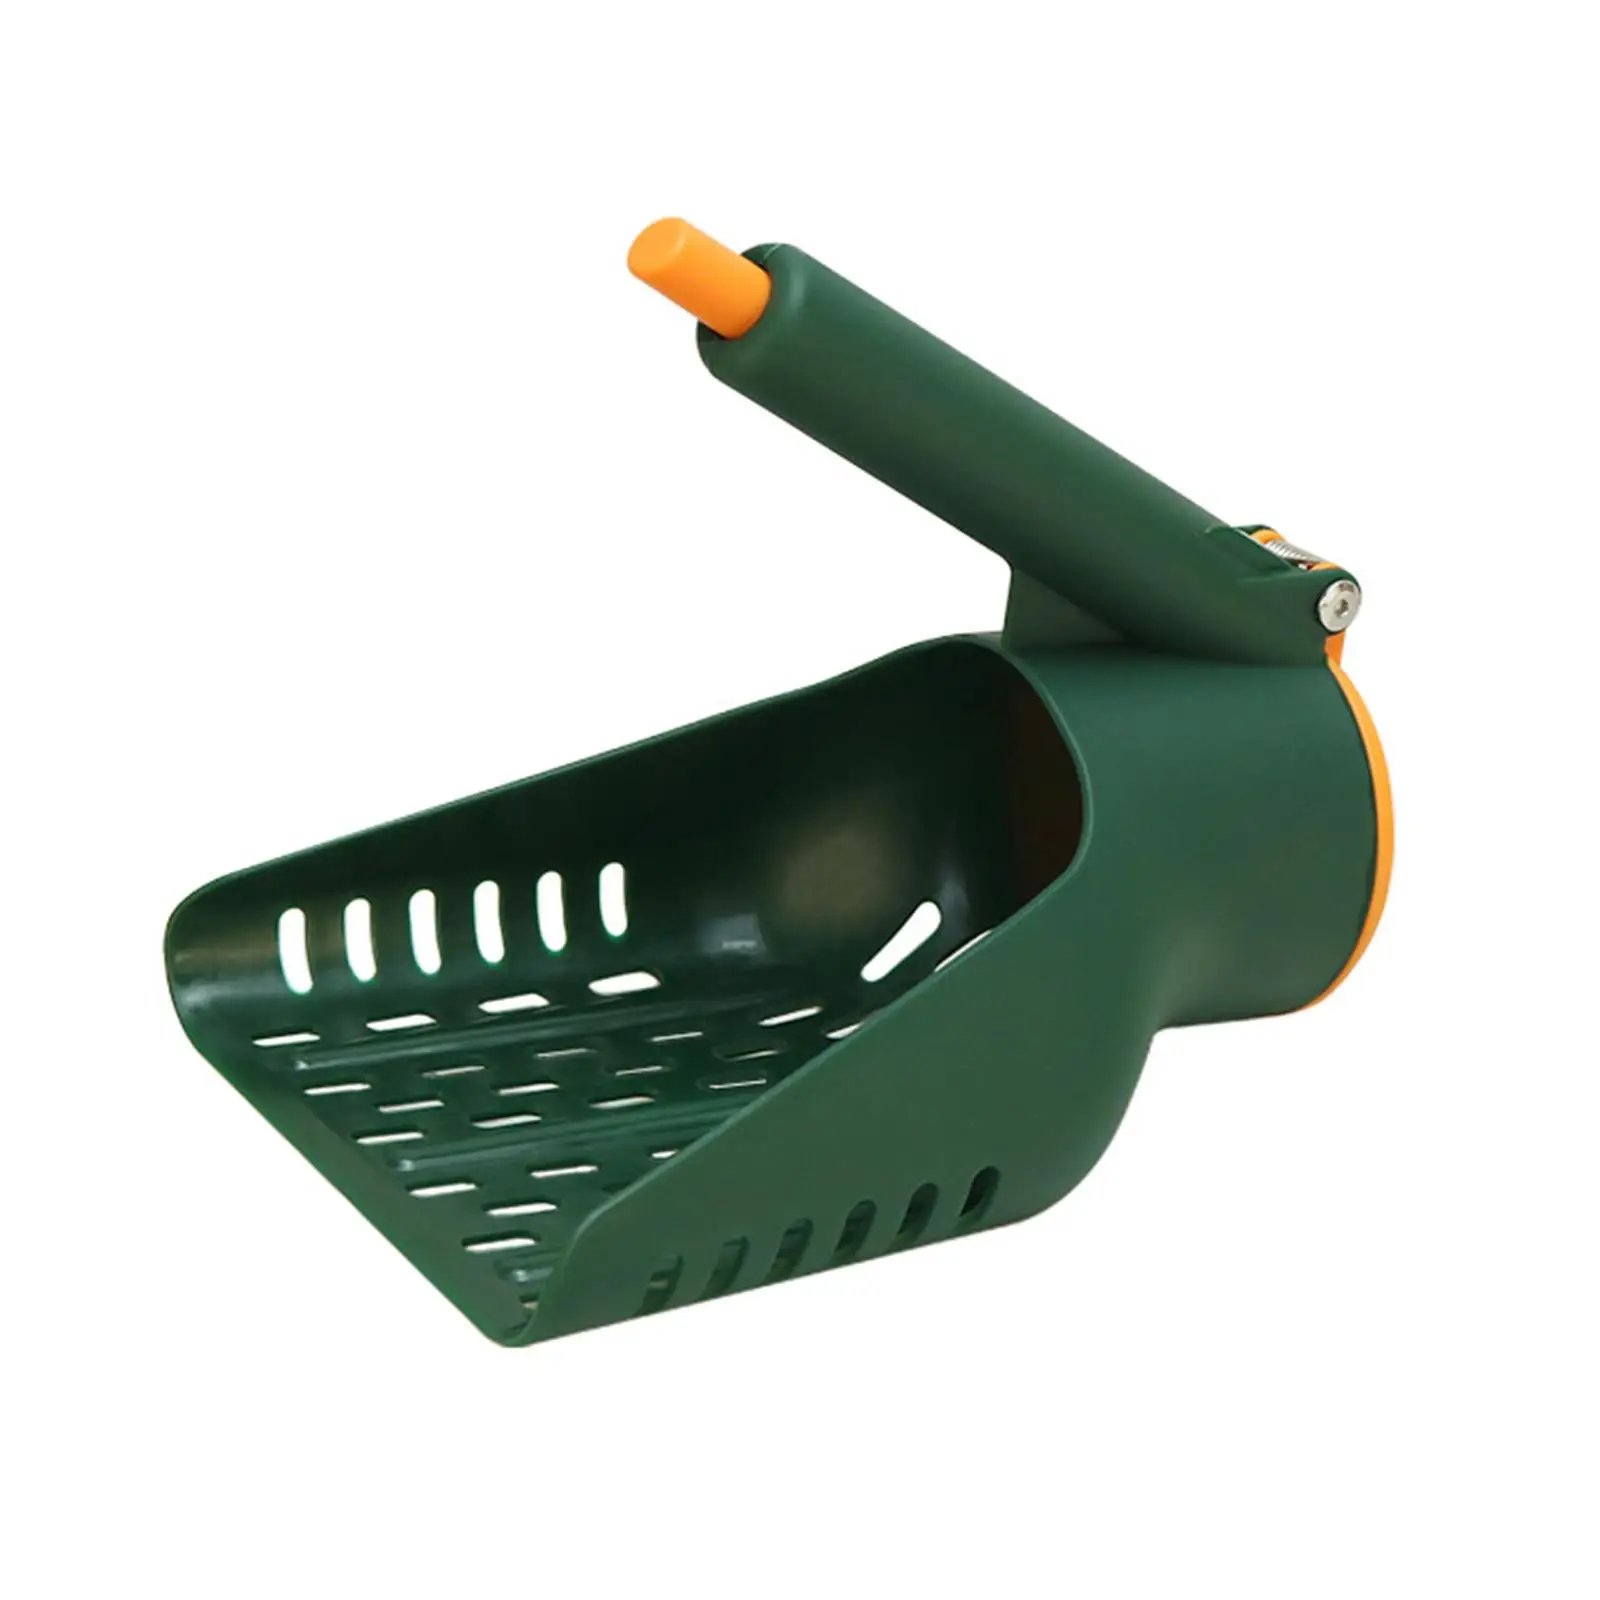 Pressing Cat Litter Scooper Waste Spoon Large Capacity Cleaner Tools Tray